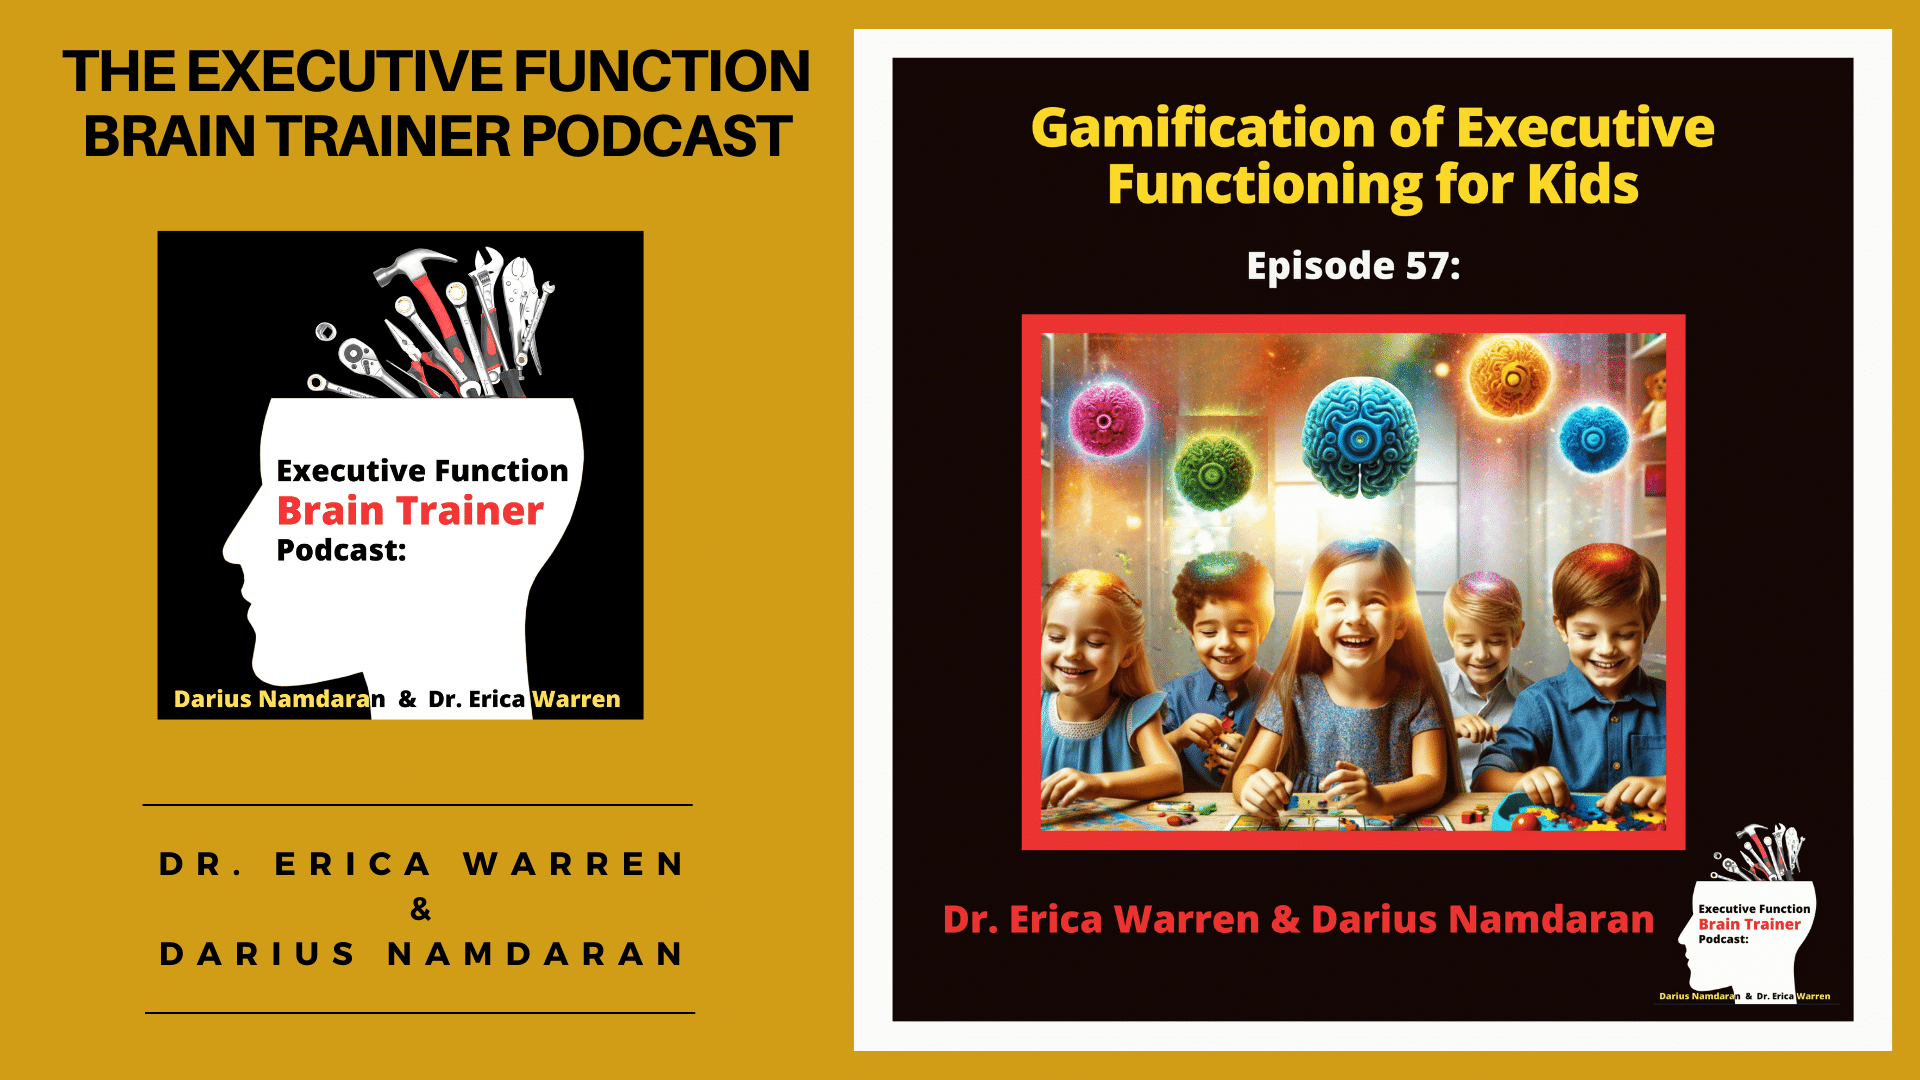 Executive Functions and Gamification